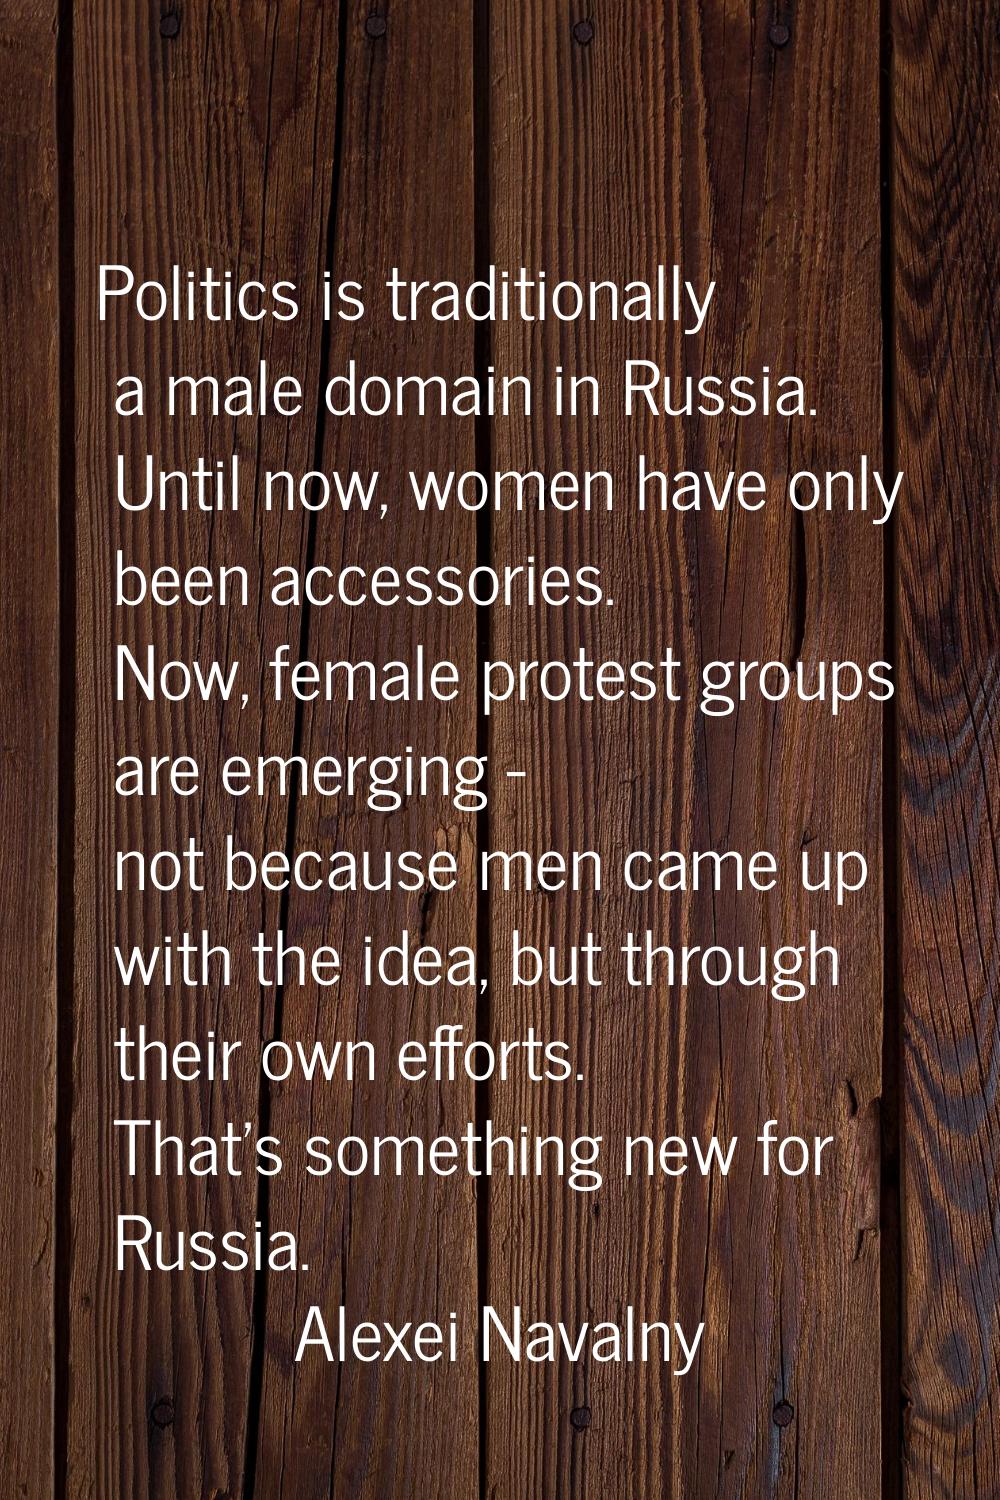 Politics is traditionally a male domain in Russia. Until now, women have only been accessories. Now